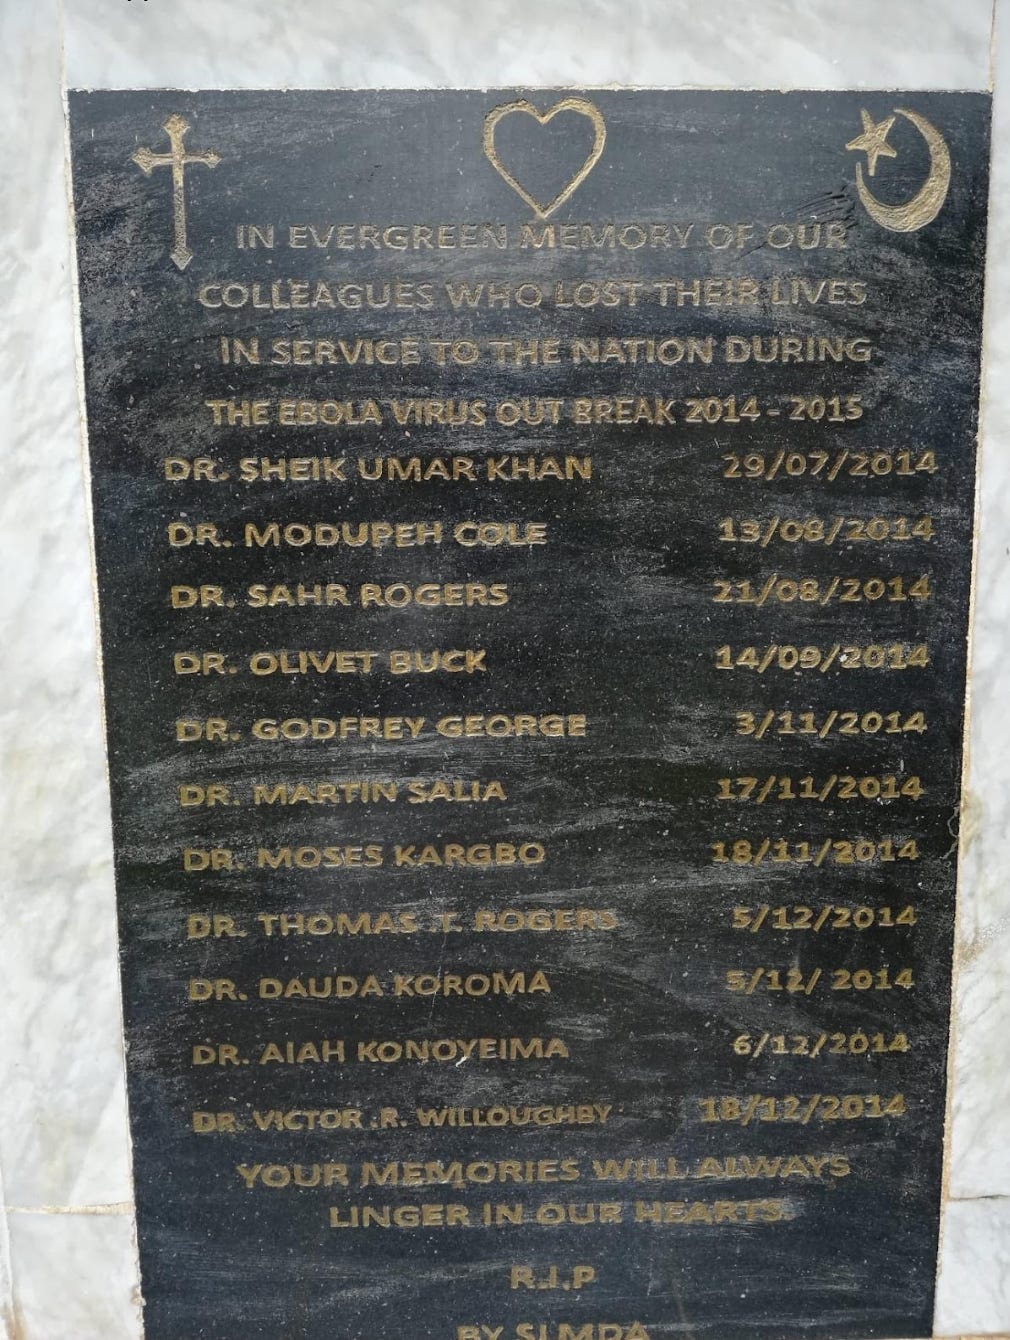 a picture of a stone memorial carved with the names of health professionals who lost their lives fighting the Ebola epidemic in Sierra Leone from 2014-2015